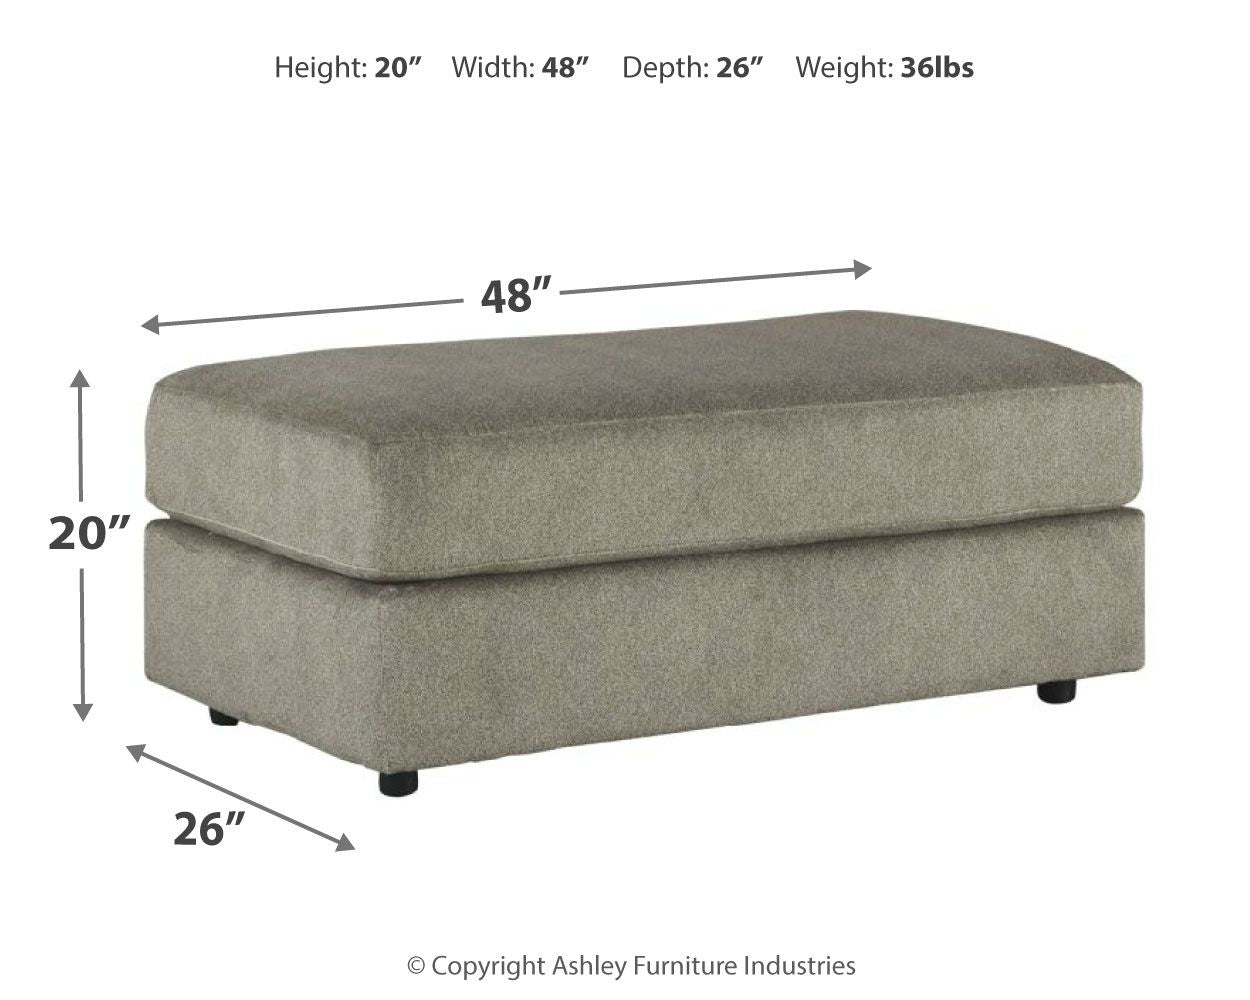 Soletren - Accent Ottoman - Tony's Home Furnishings